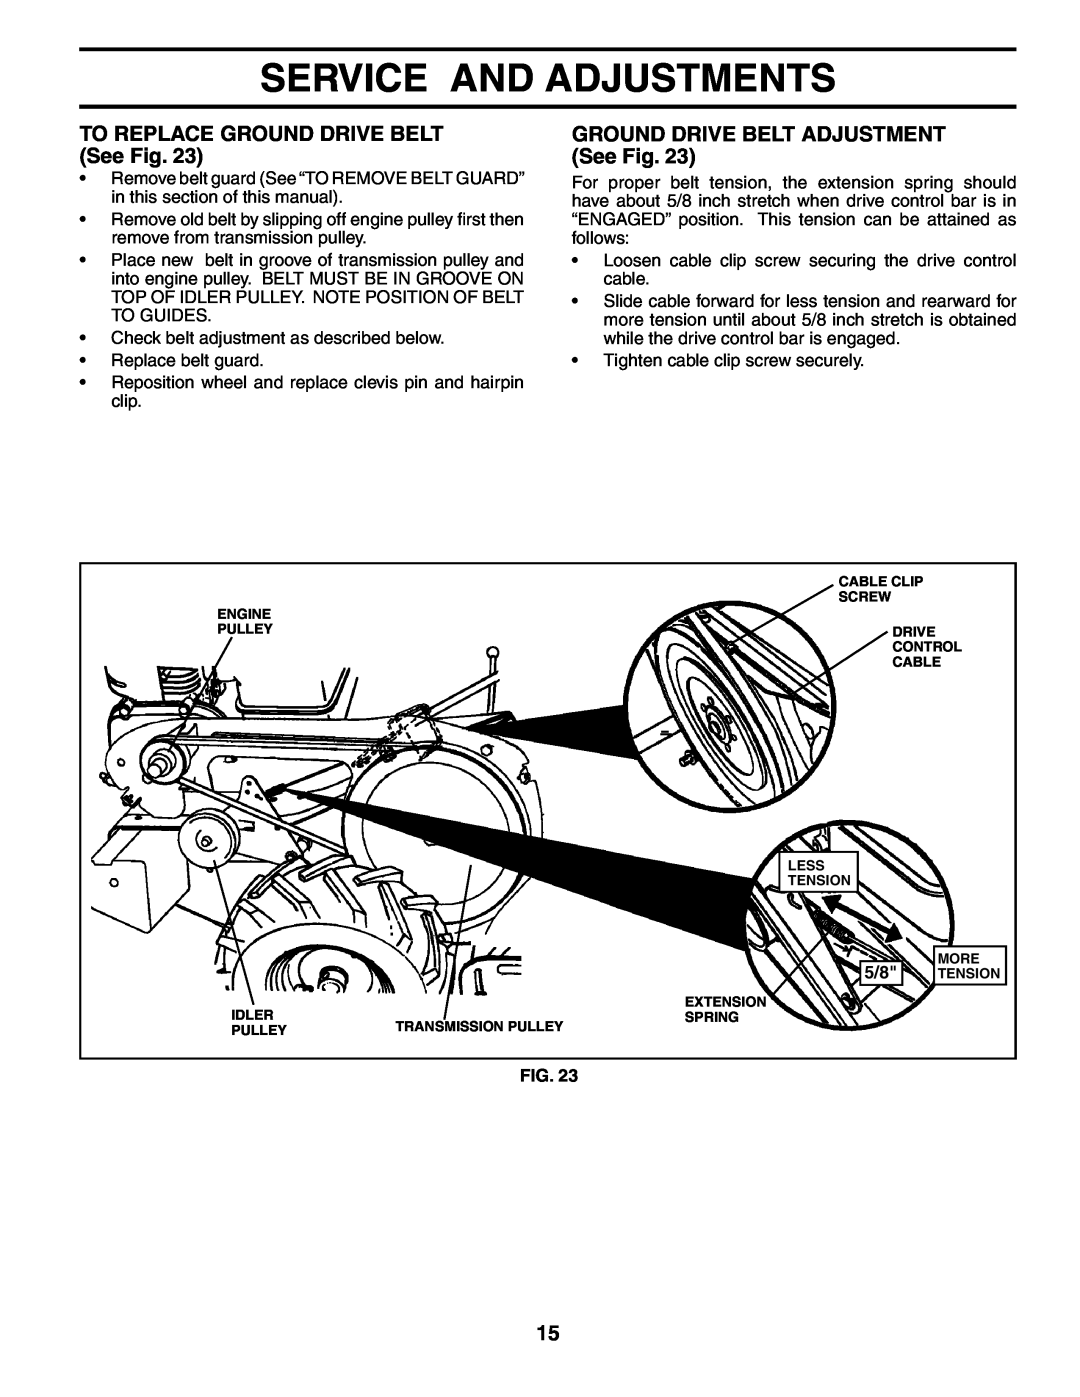 Husqvarna 650RTT TO REPLACE GROUND DRIVE BELT See Fig, GROUND DRIVE BELT ADJUSTMENT See Fig, Service And Adjustments 